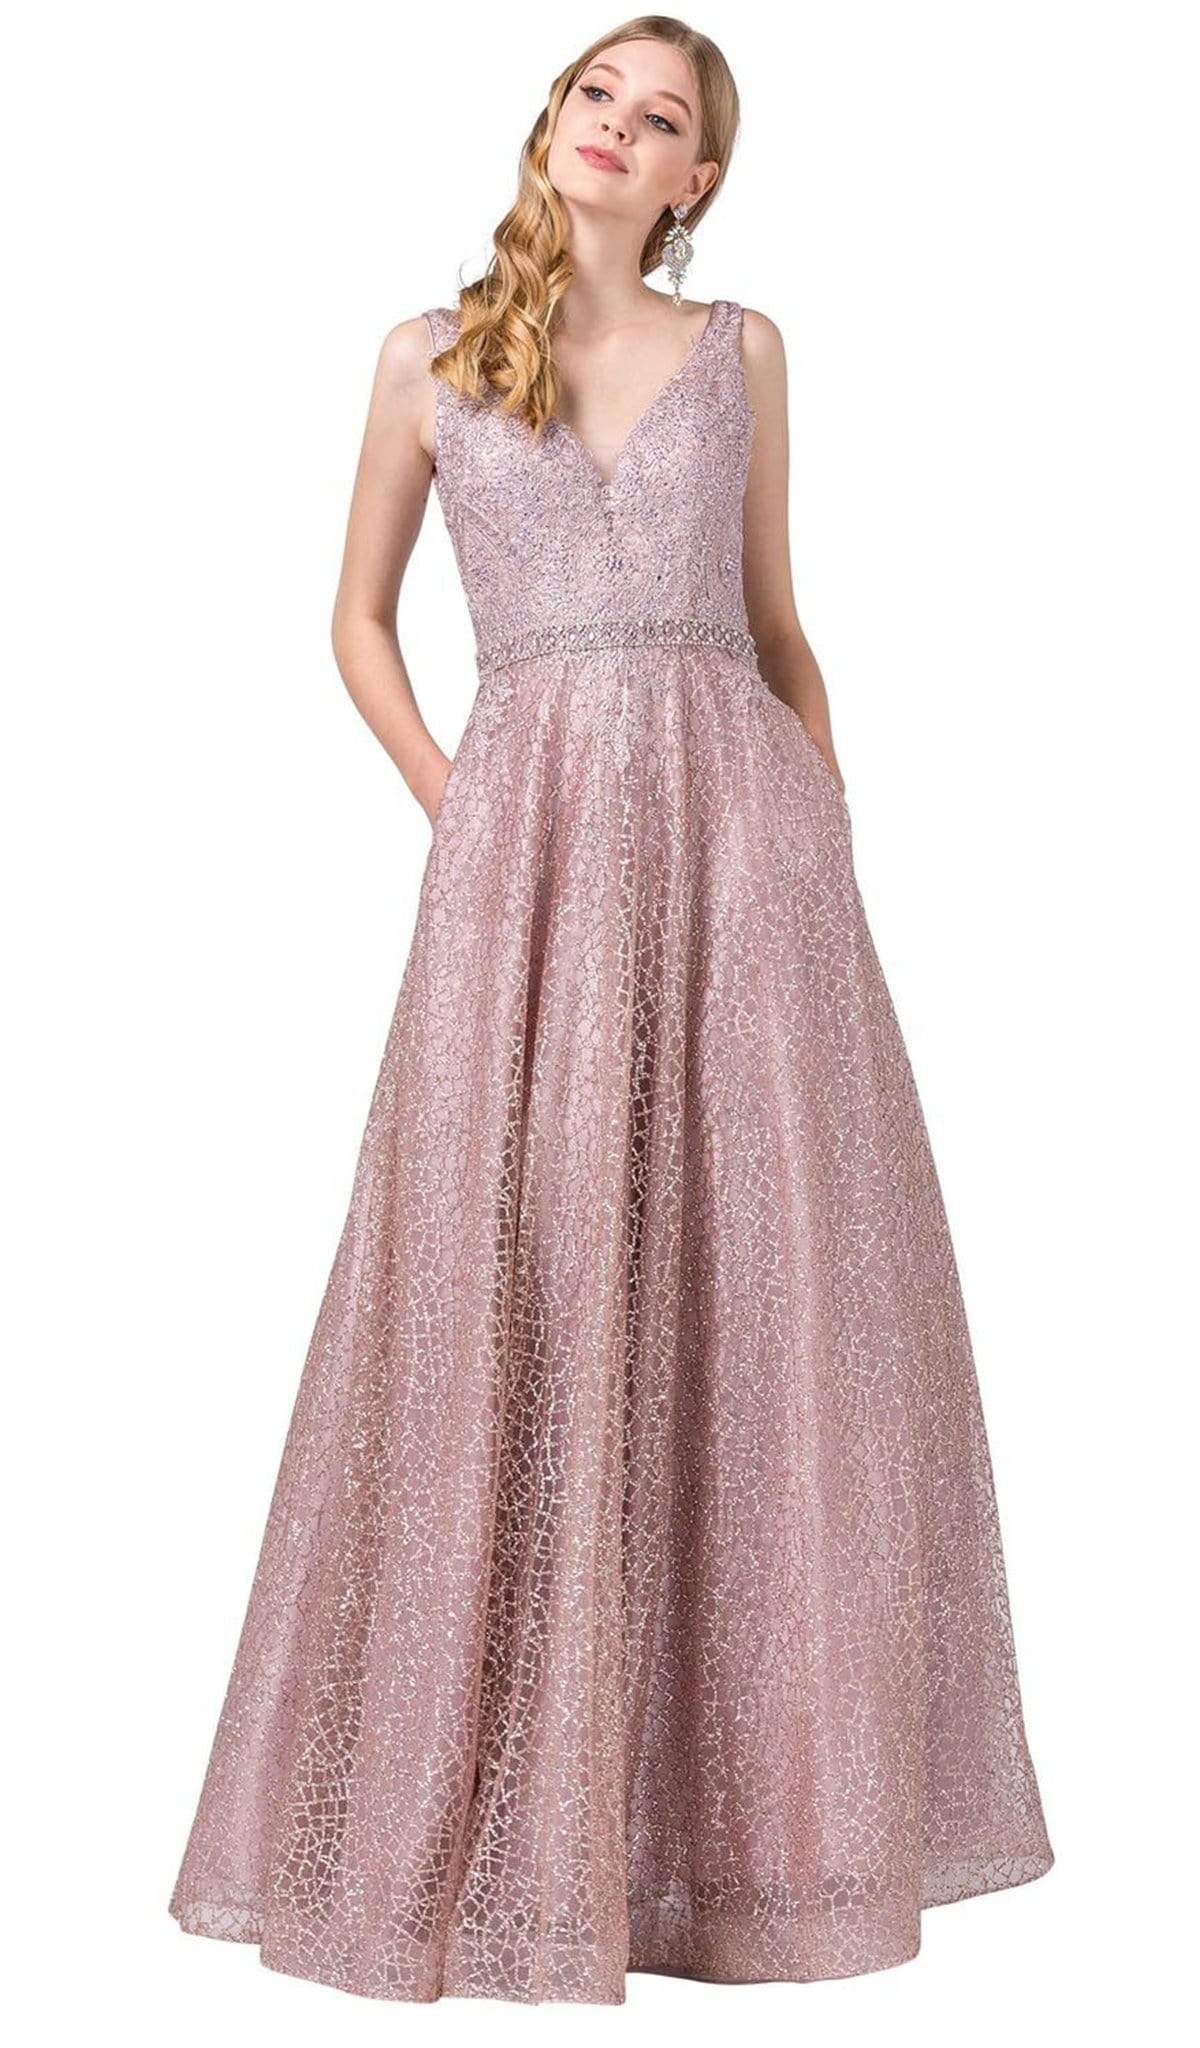 Dancing Queen - 2775 Embellished V-neck Long A-line Dress Special Occasion Dress XS / Rose Gold